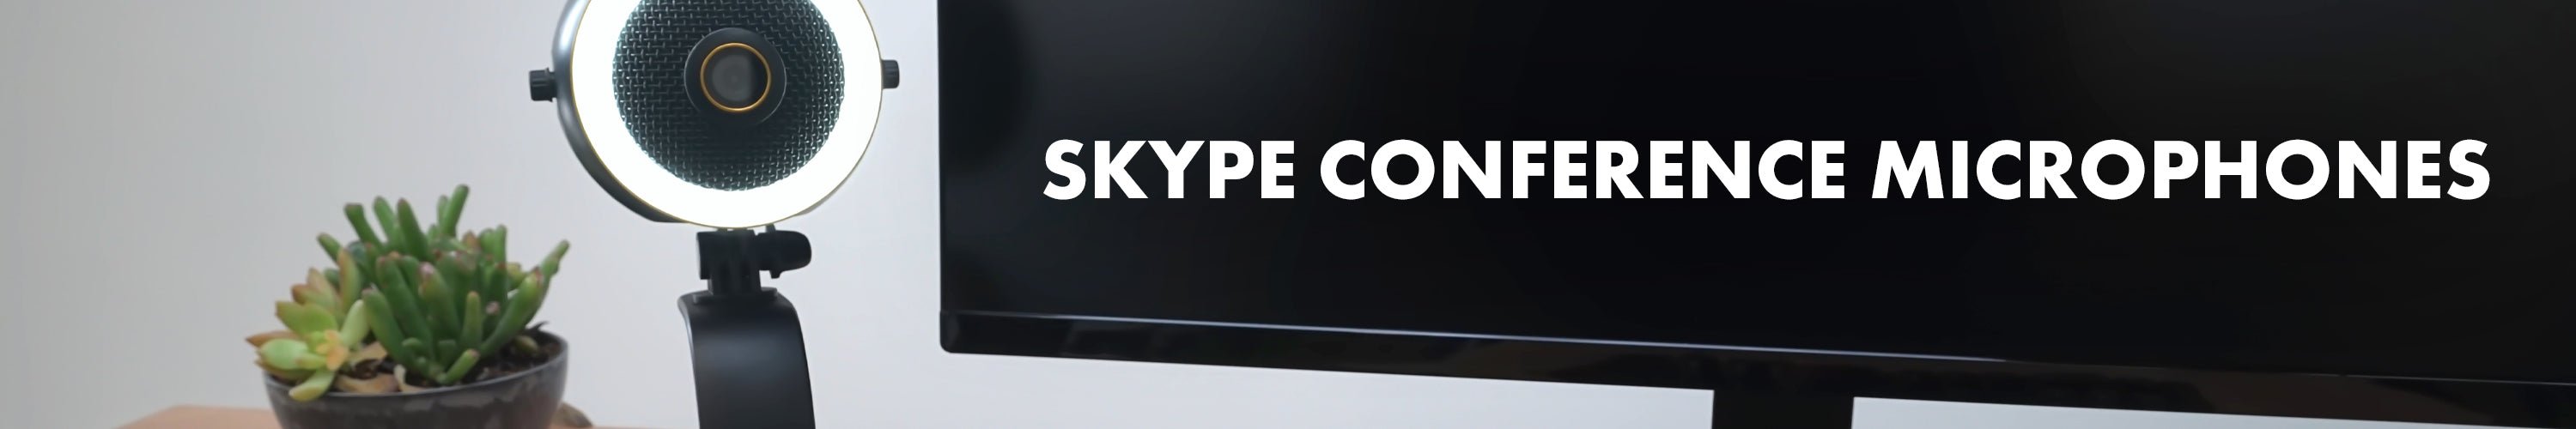 Skype Conference Microphones - Movo